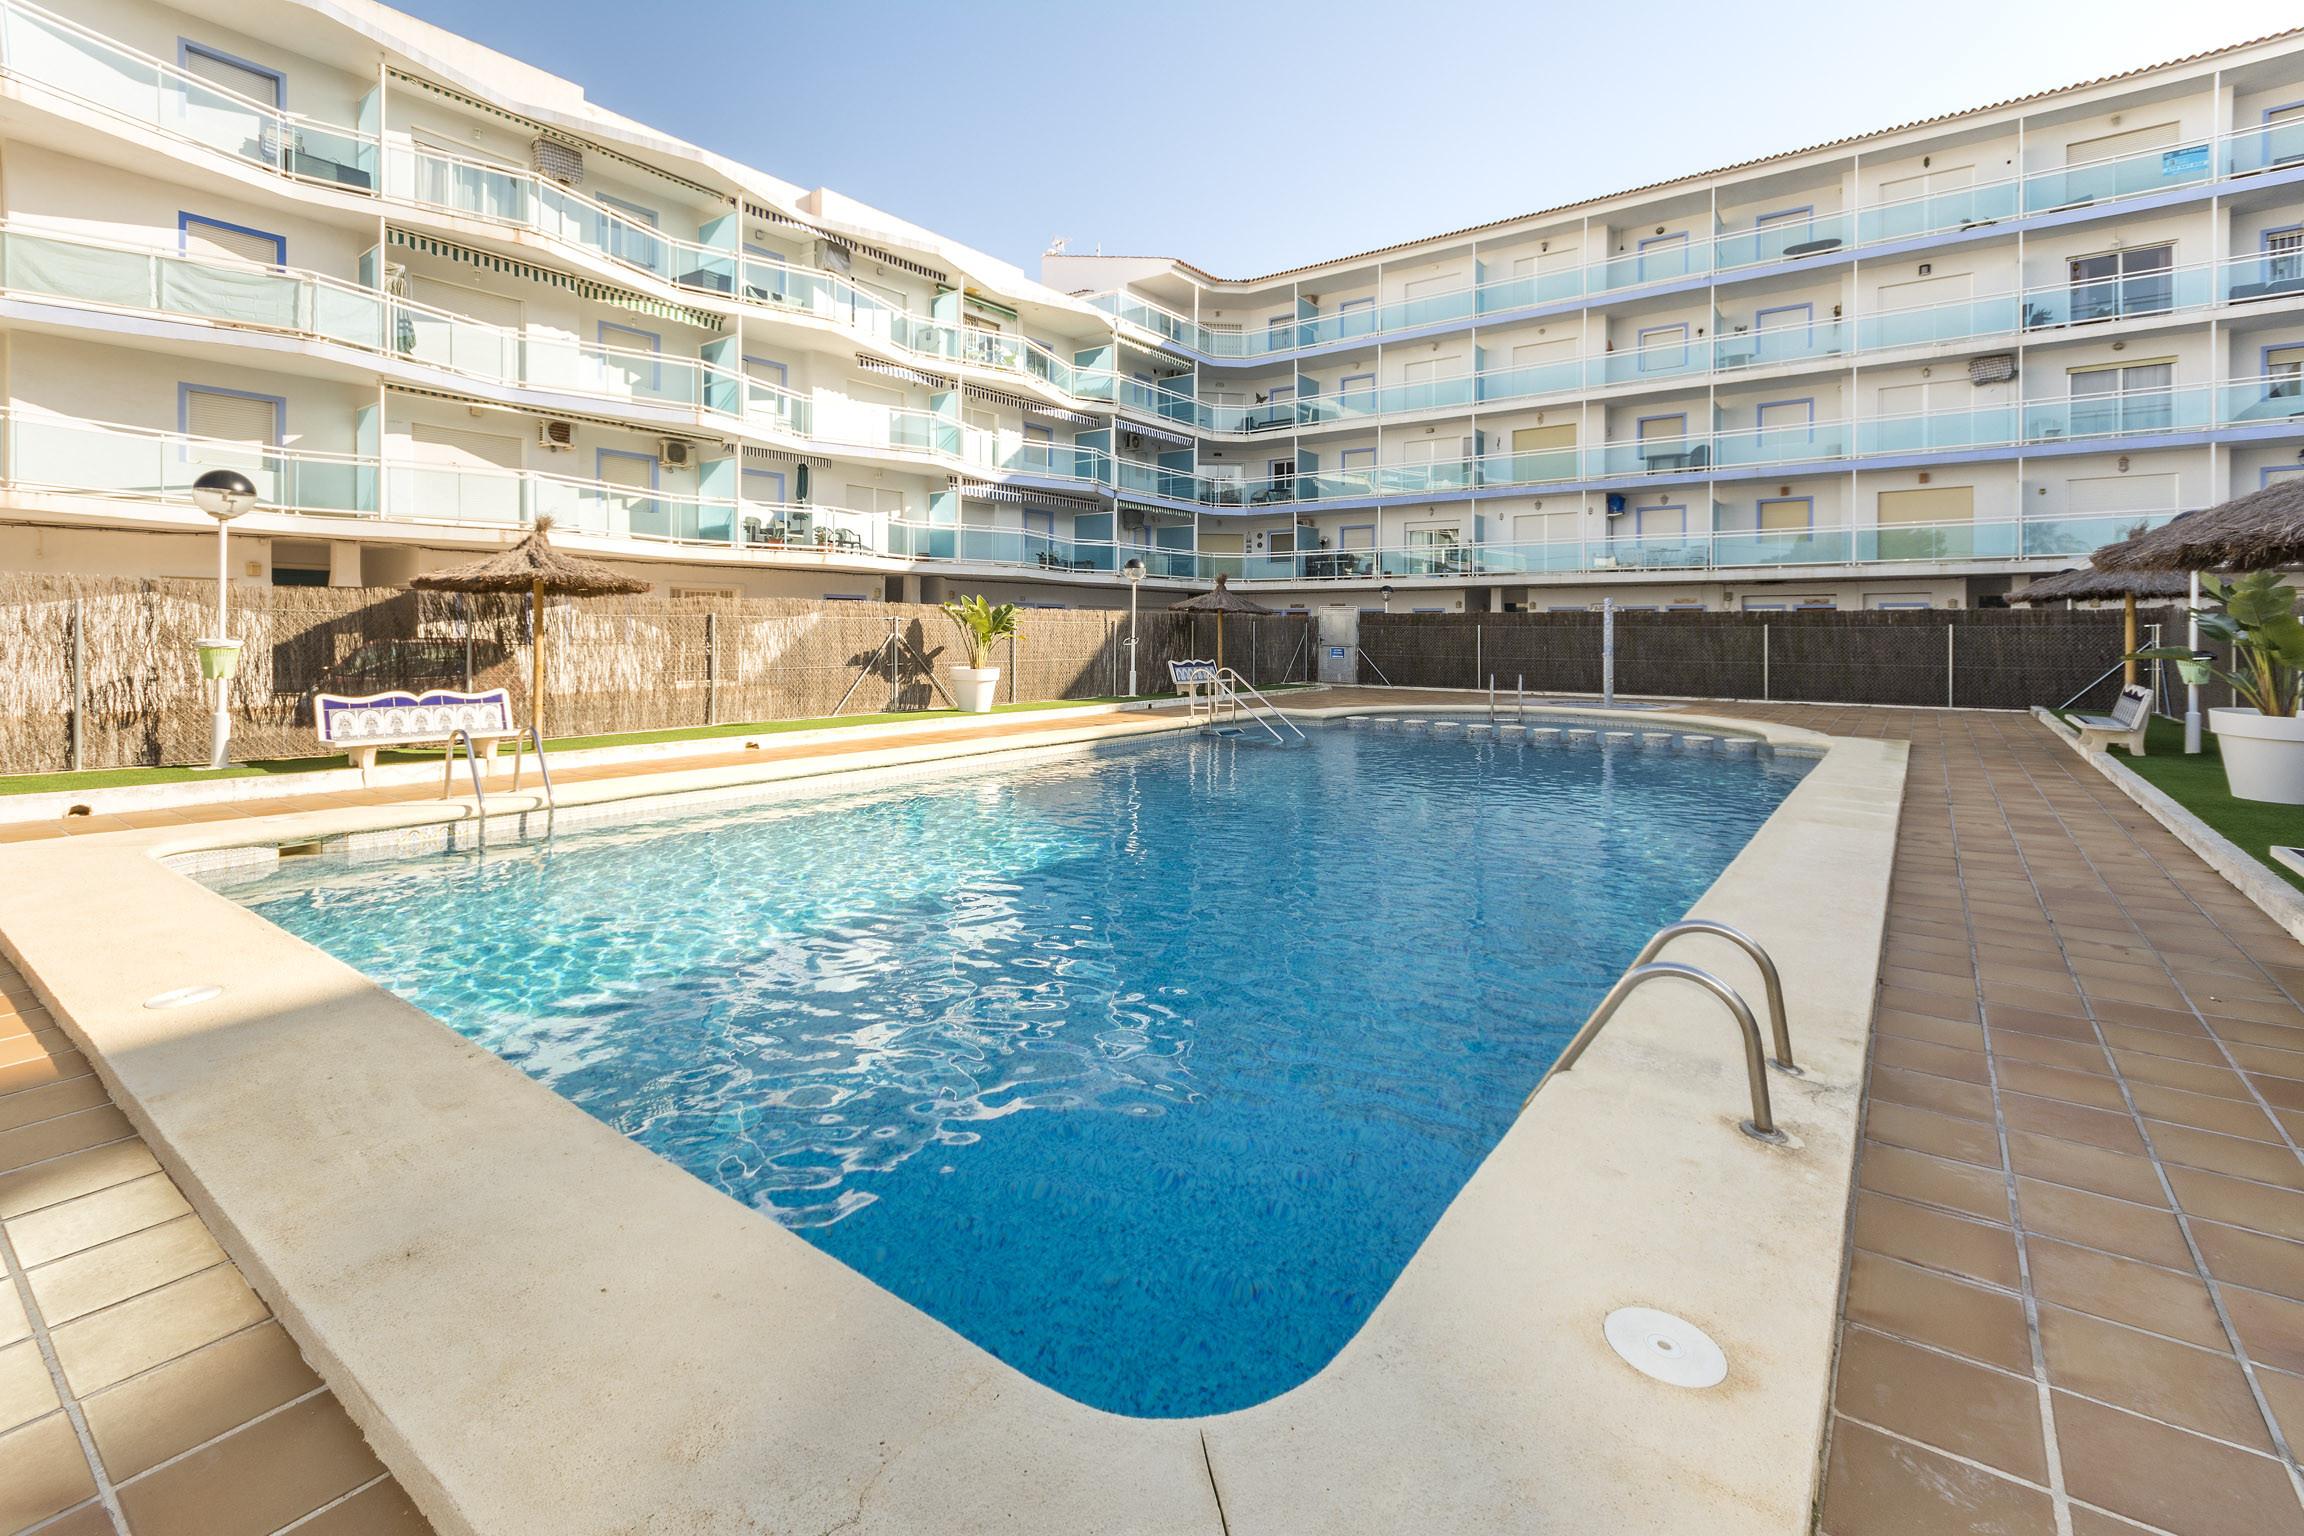 Property Image 2 - EGEU - Bright apartment with shared pool and free WiFi.